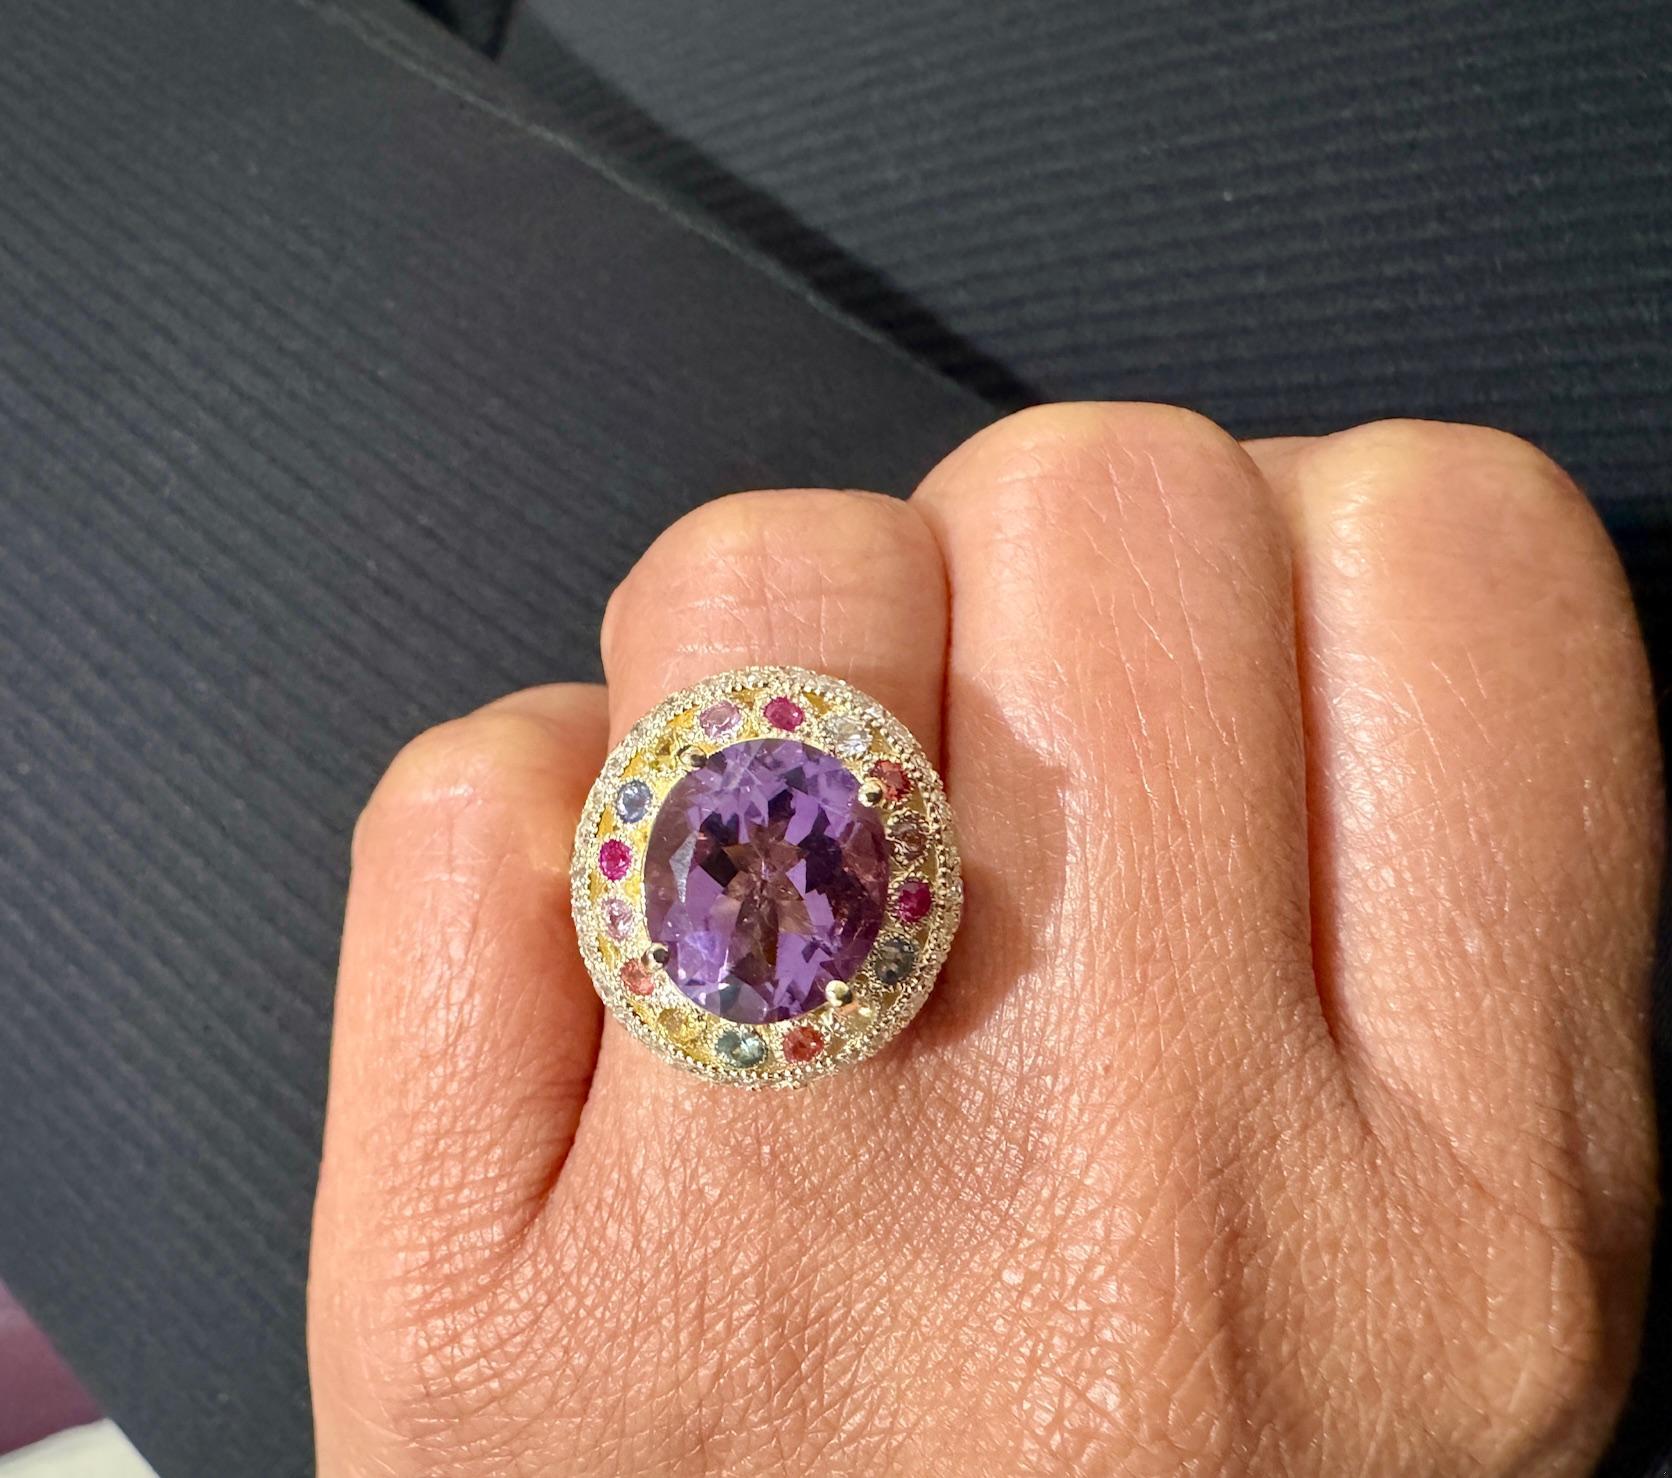 5.62 Carat Natural Amethyst Diamond Sapphire Yellow Gold Cocktail Ring